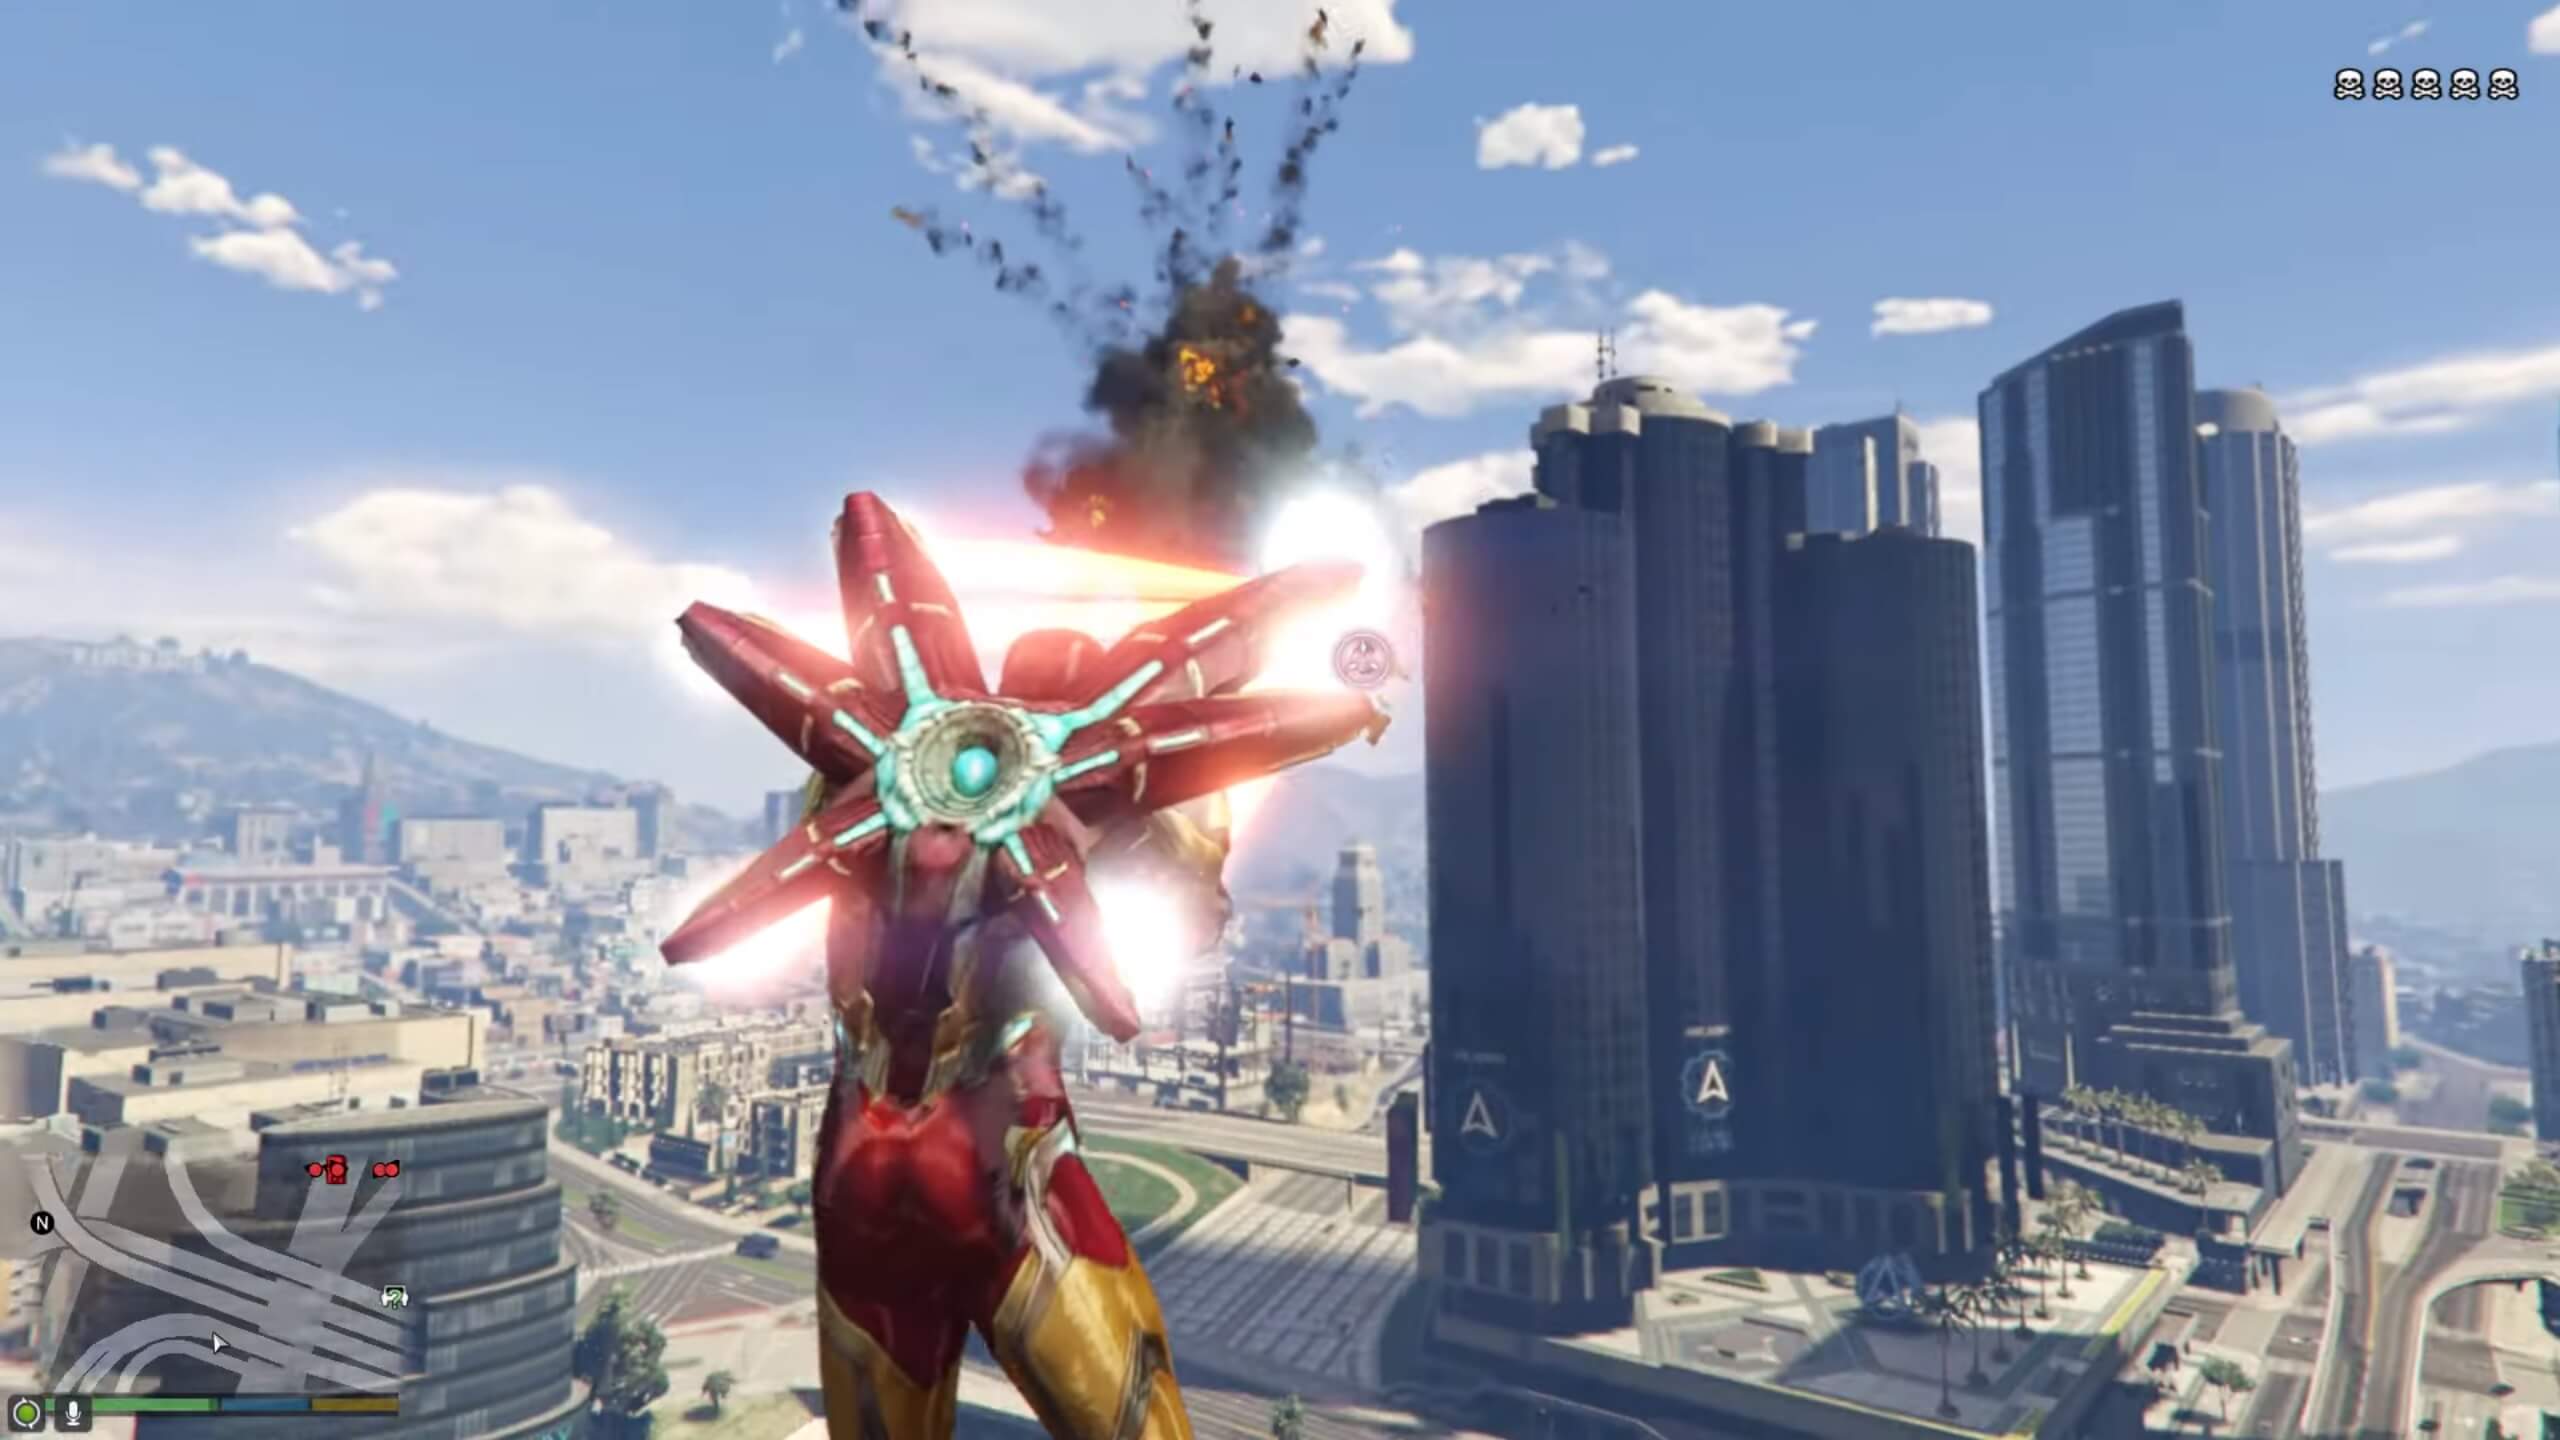 Grand Theft Auto 5 Iron Man Endgame Mod Is Now Available For